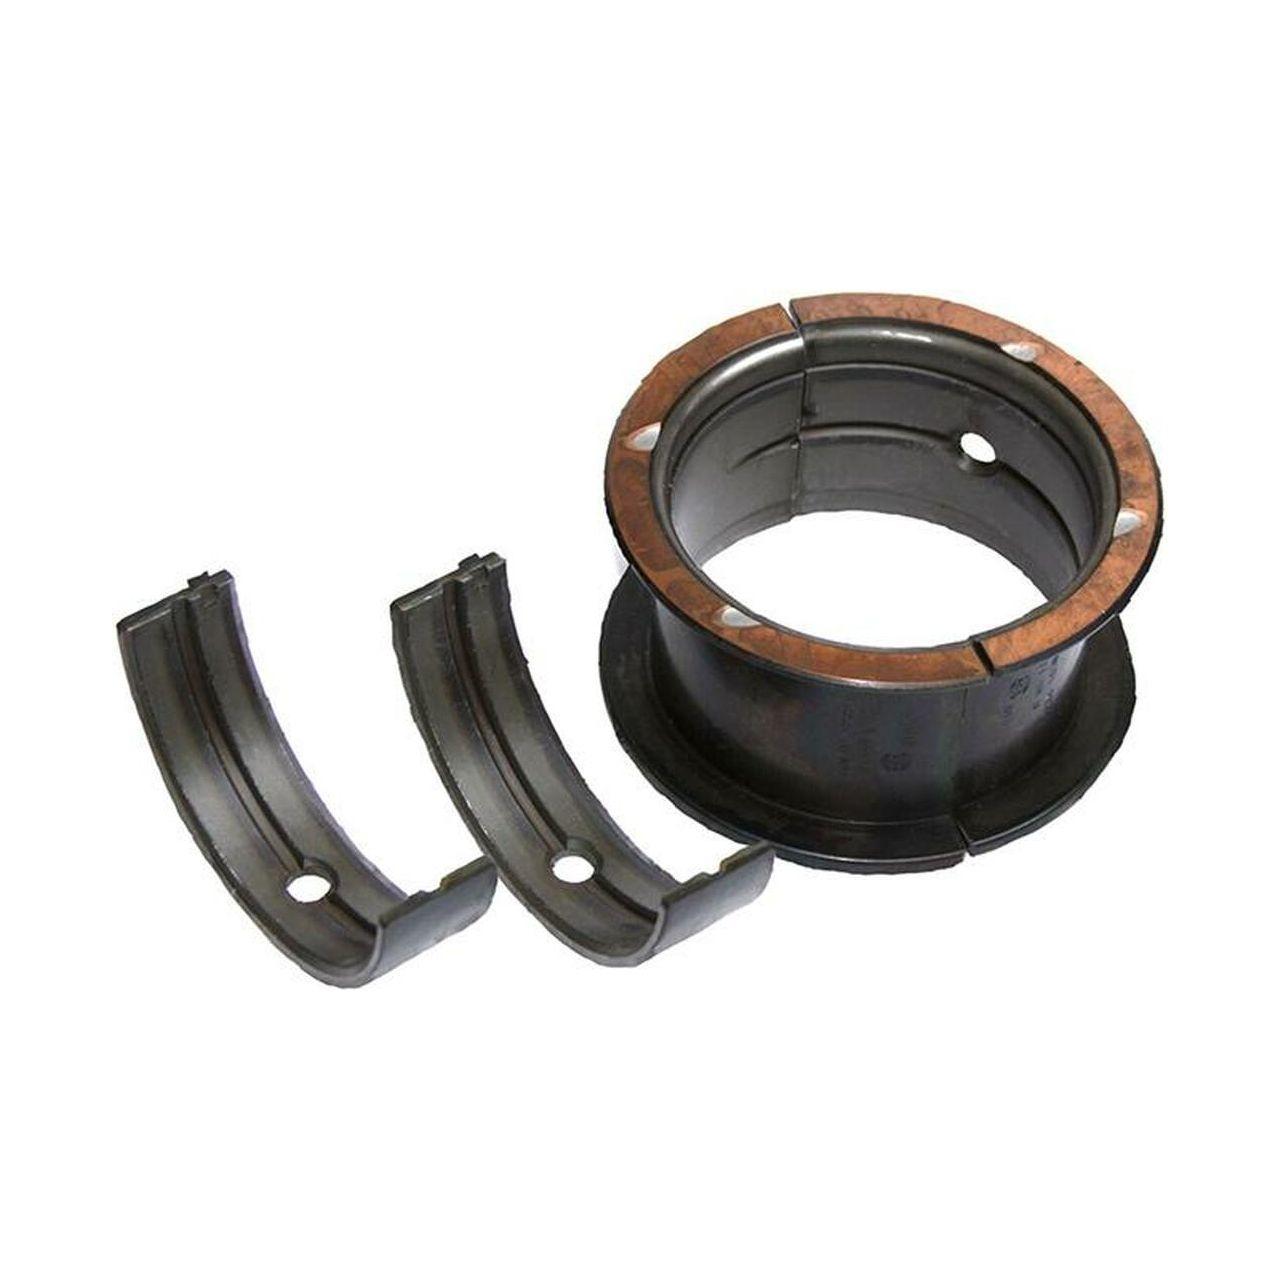 ACL Toyota/Lexus 2JZGE/2JZGTE 3.0L 0.025 Oversized High Performance Rod Bearing Set - SMINKpower Performance Parts ACL6B8100H-.025 ACL